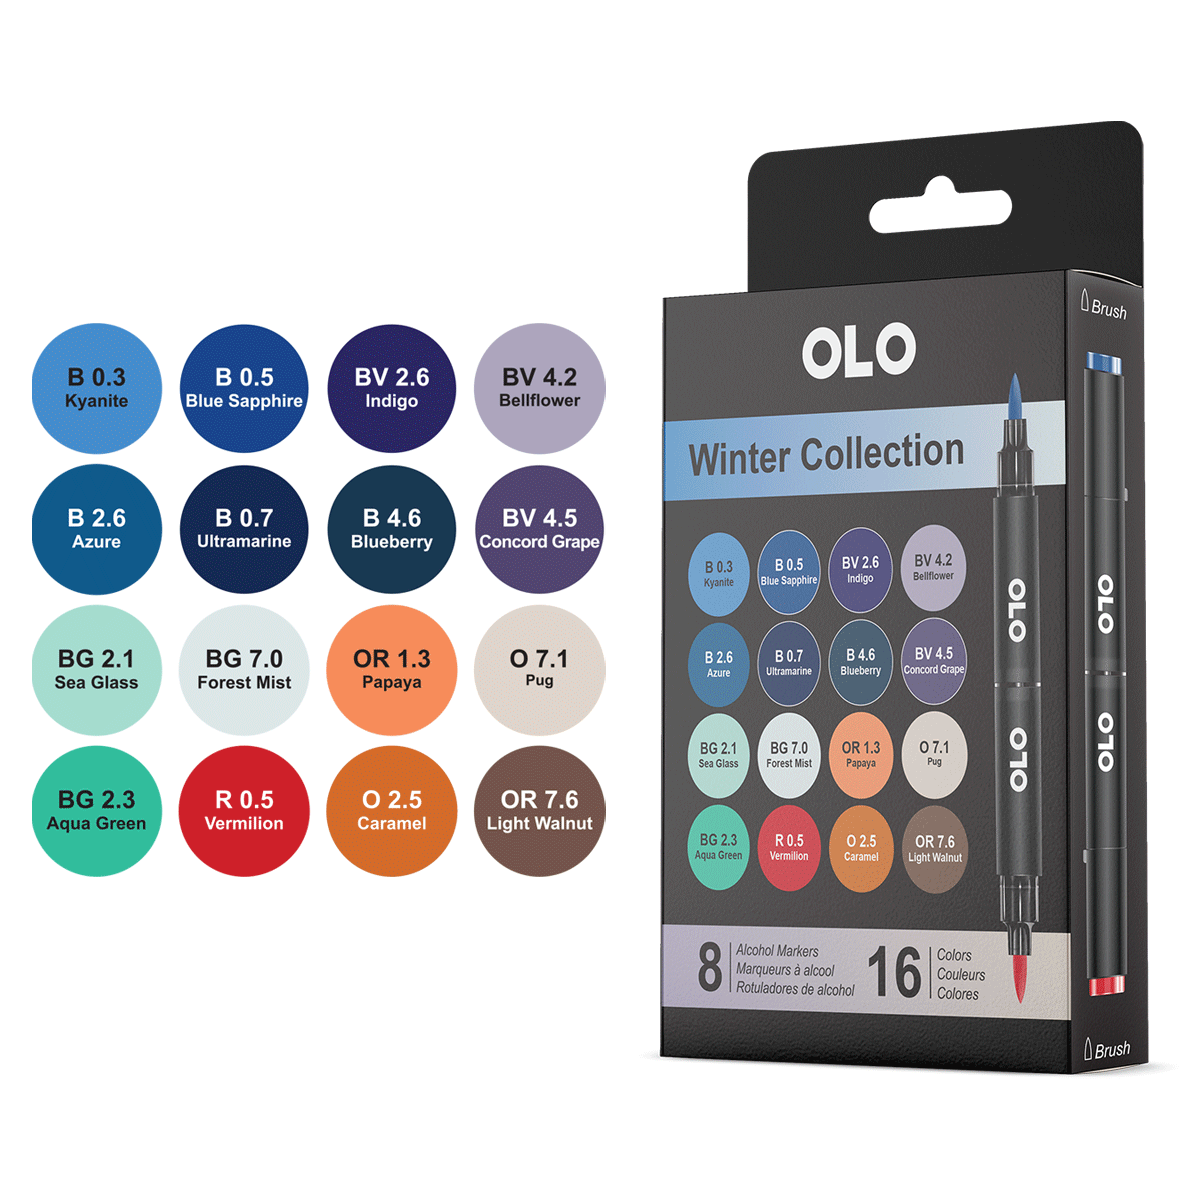 OLO Alcohol Markers Winter Coll 16 Colors